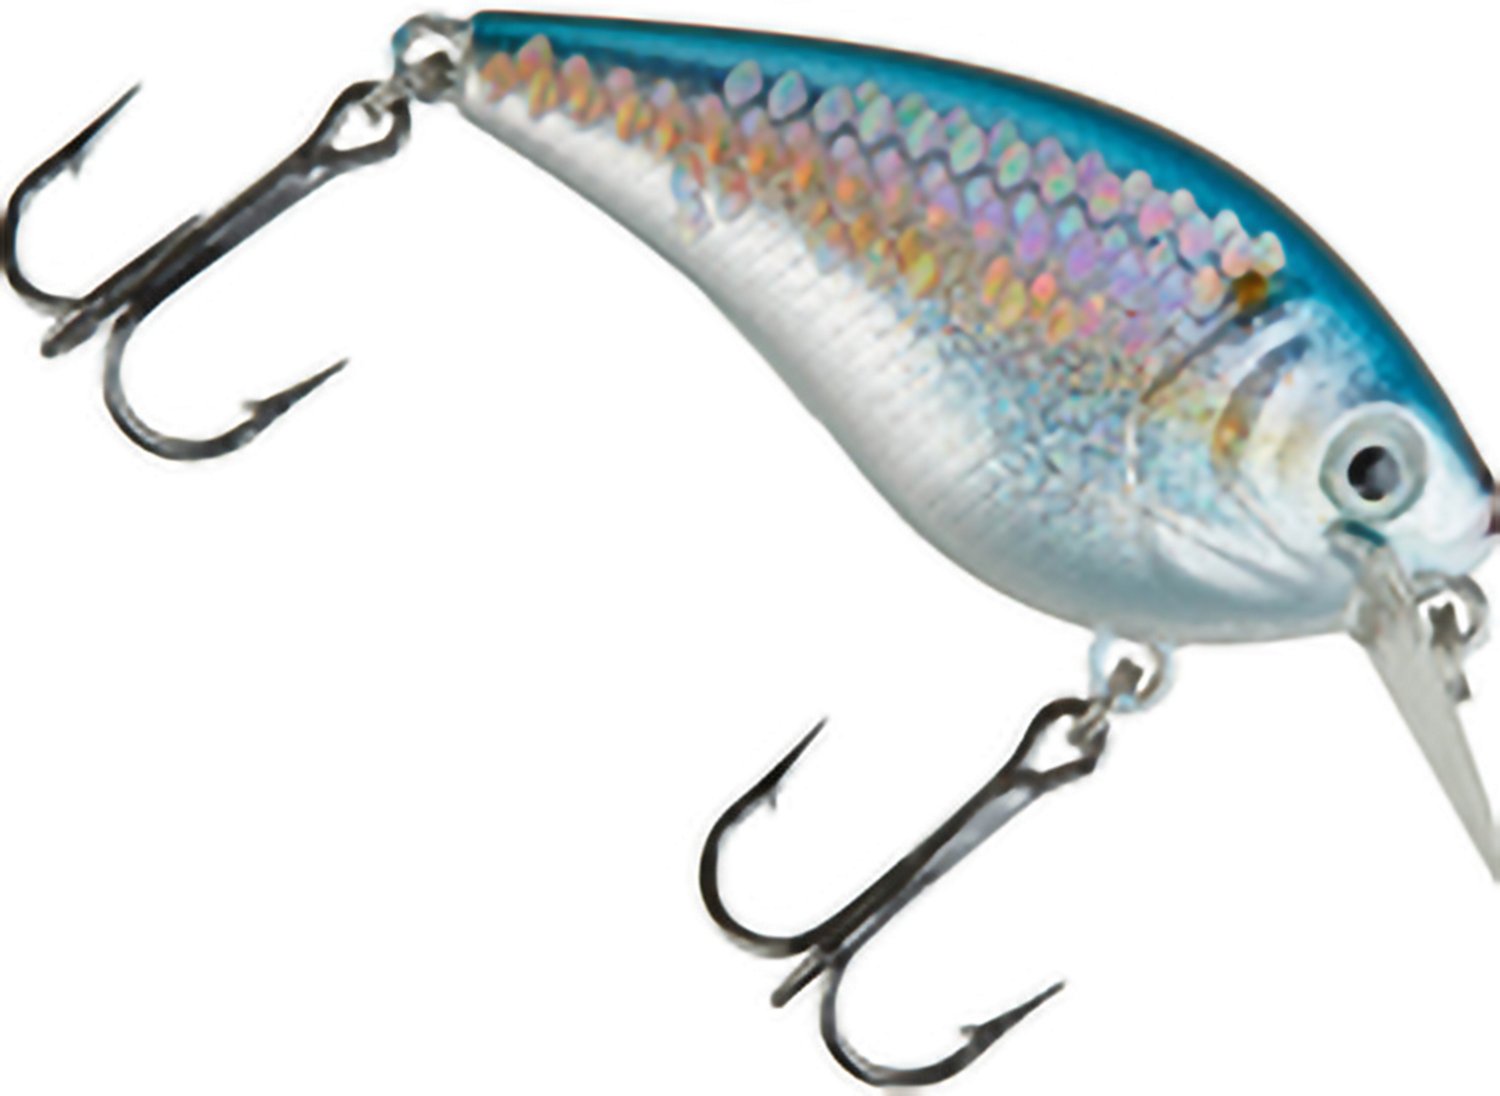 Favorite H20 express lure from Academy? - Fishing Tackle - Bass